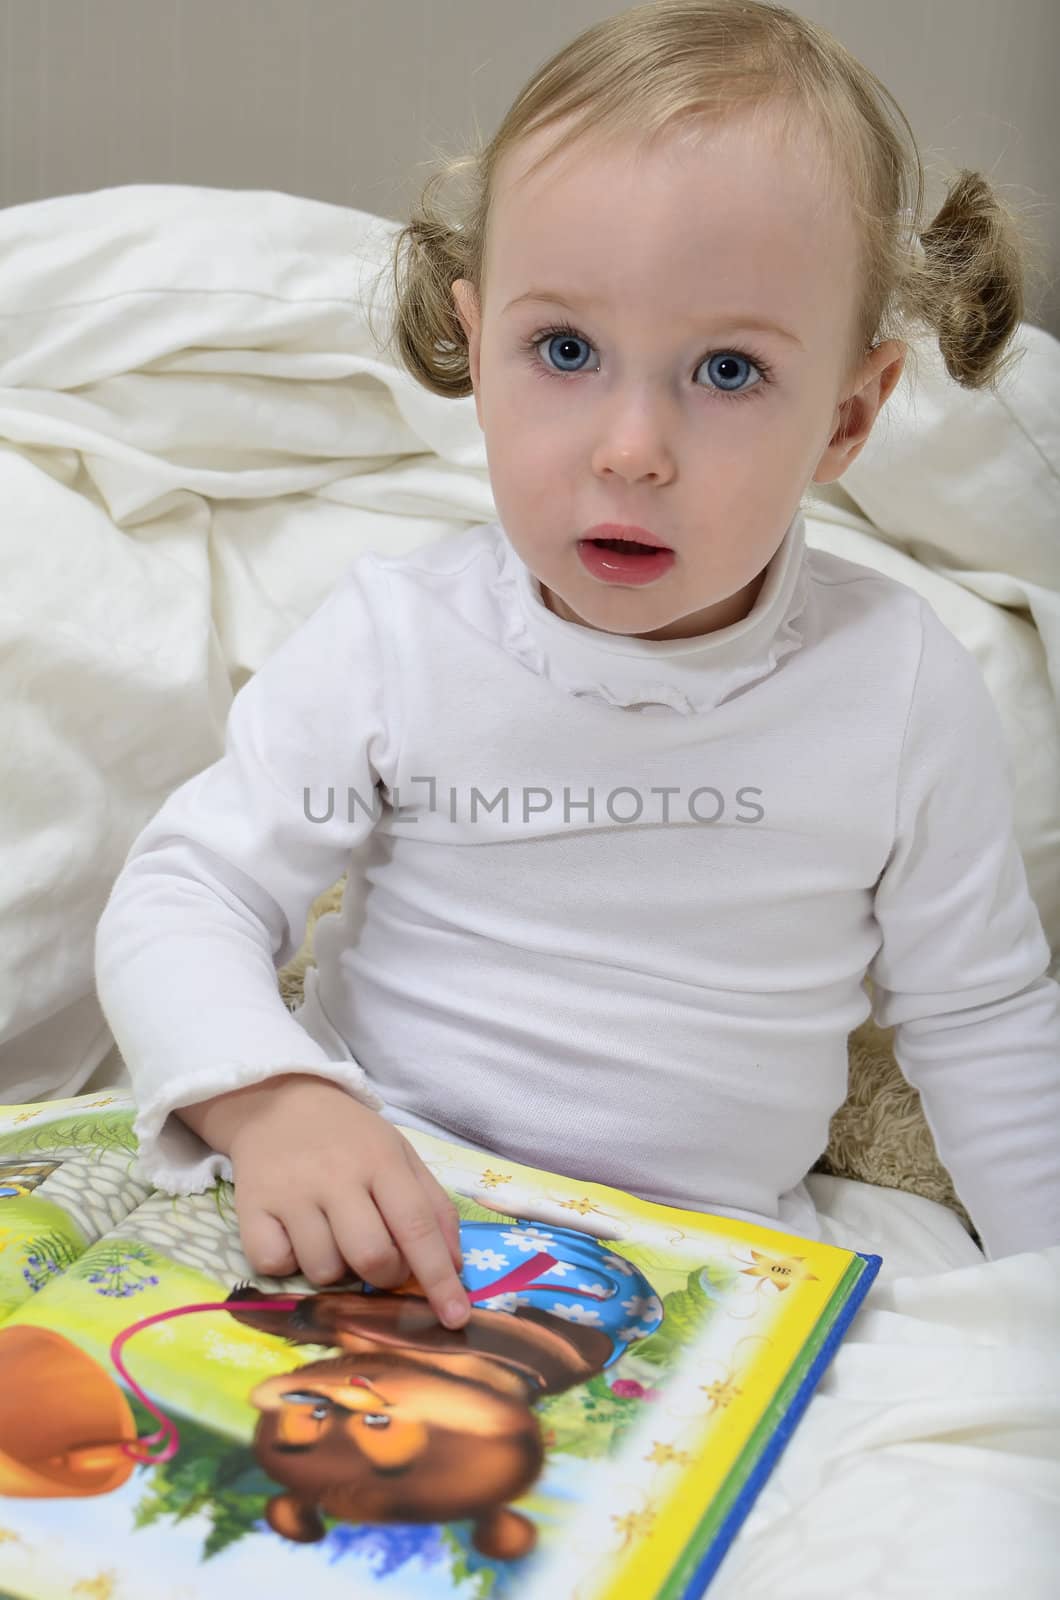 little girl sitting on the bed and reading a book